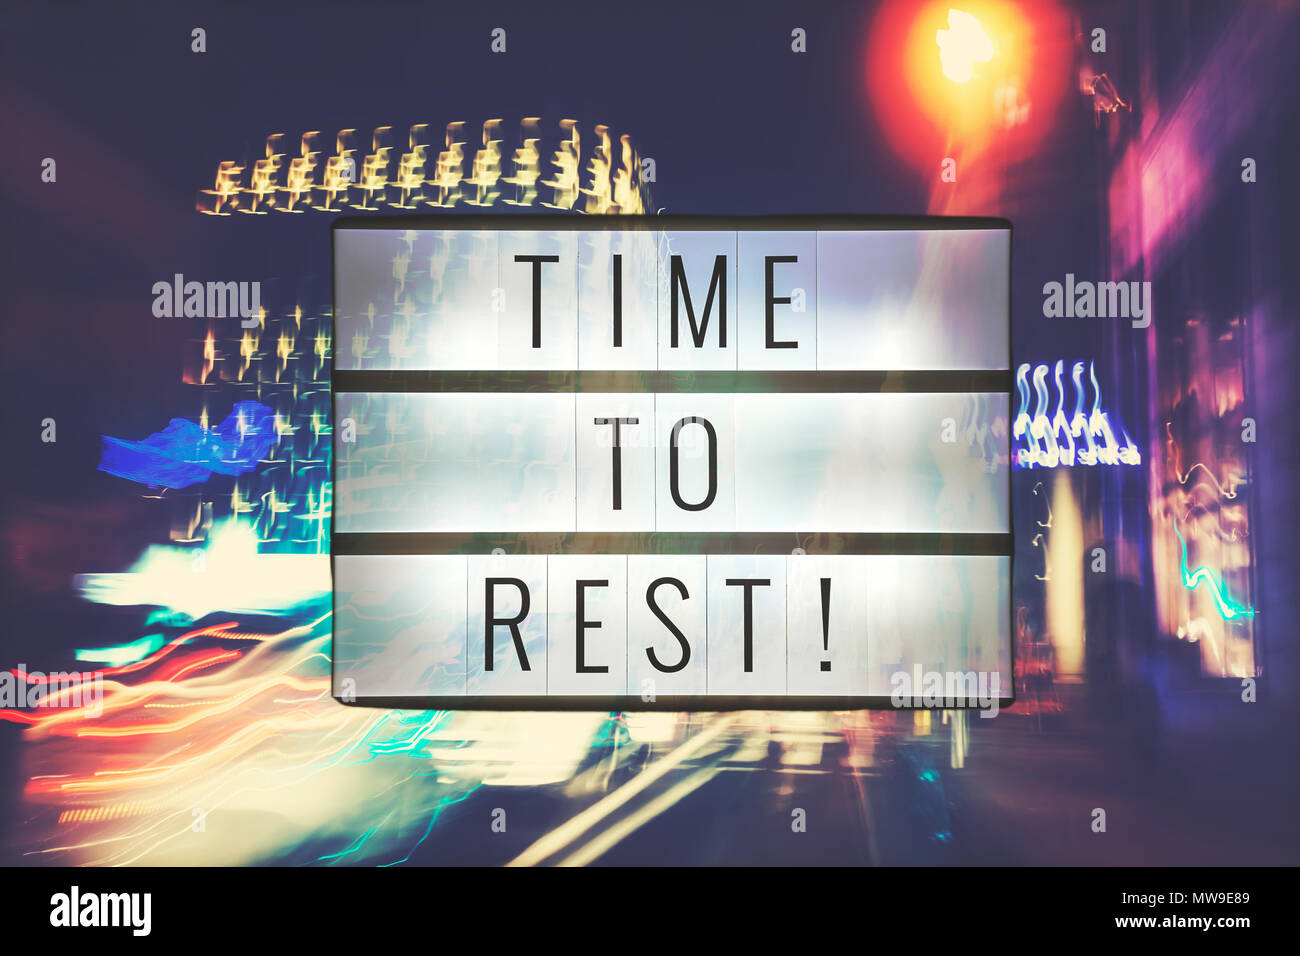 Time to Rest text in light box, motion blurred city lights in background, color toned picture. Stock Photo